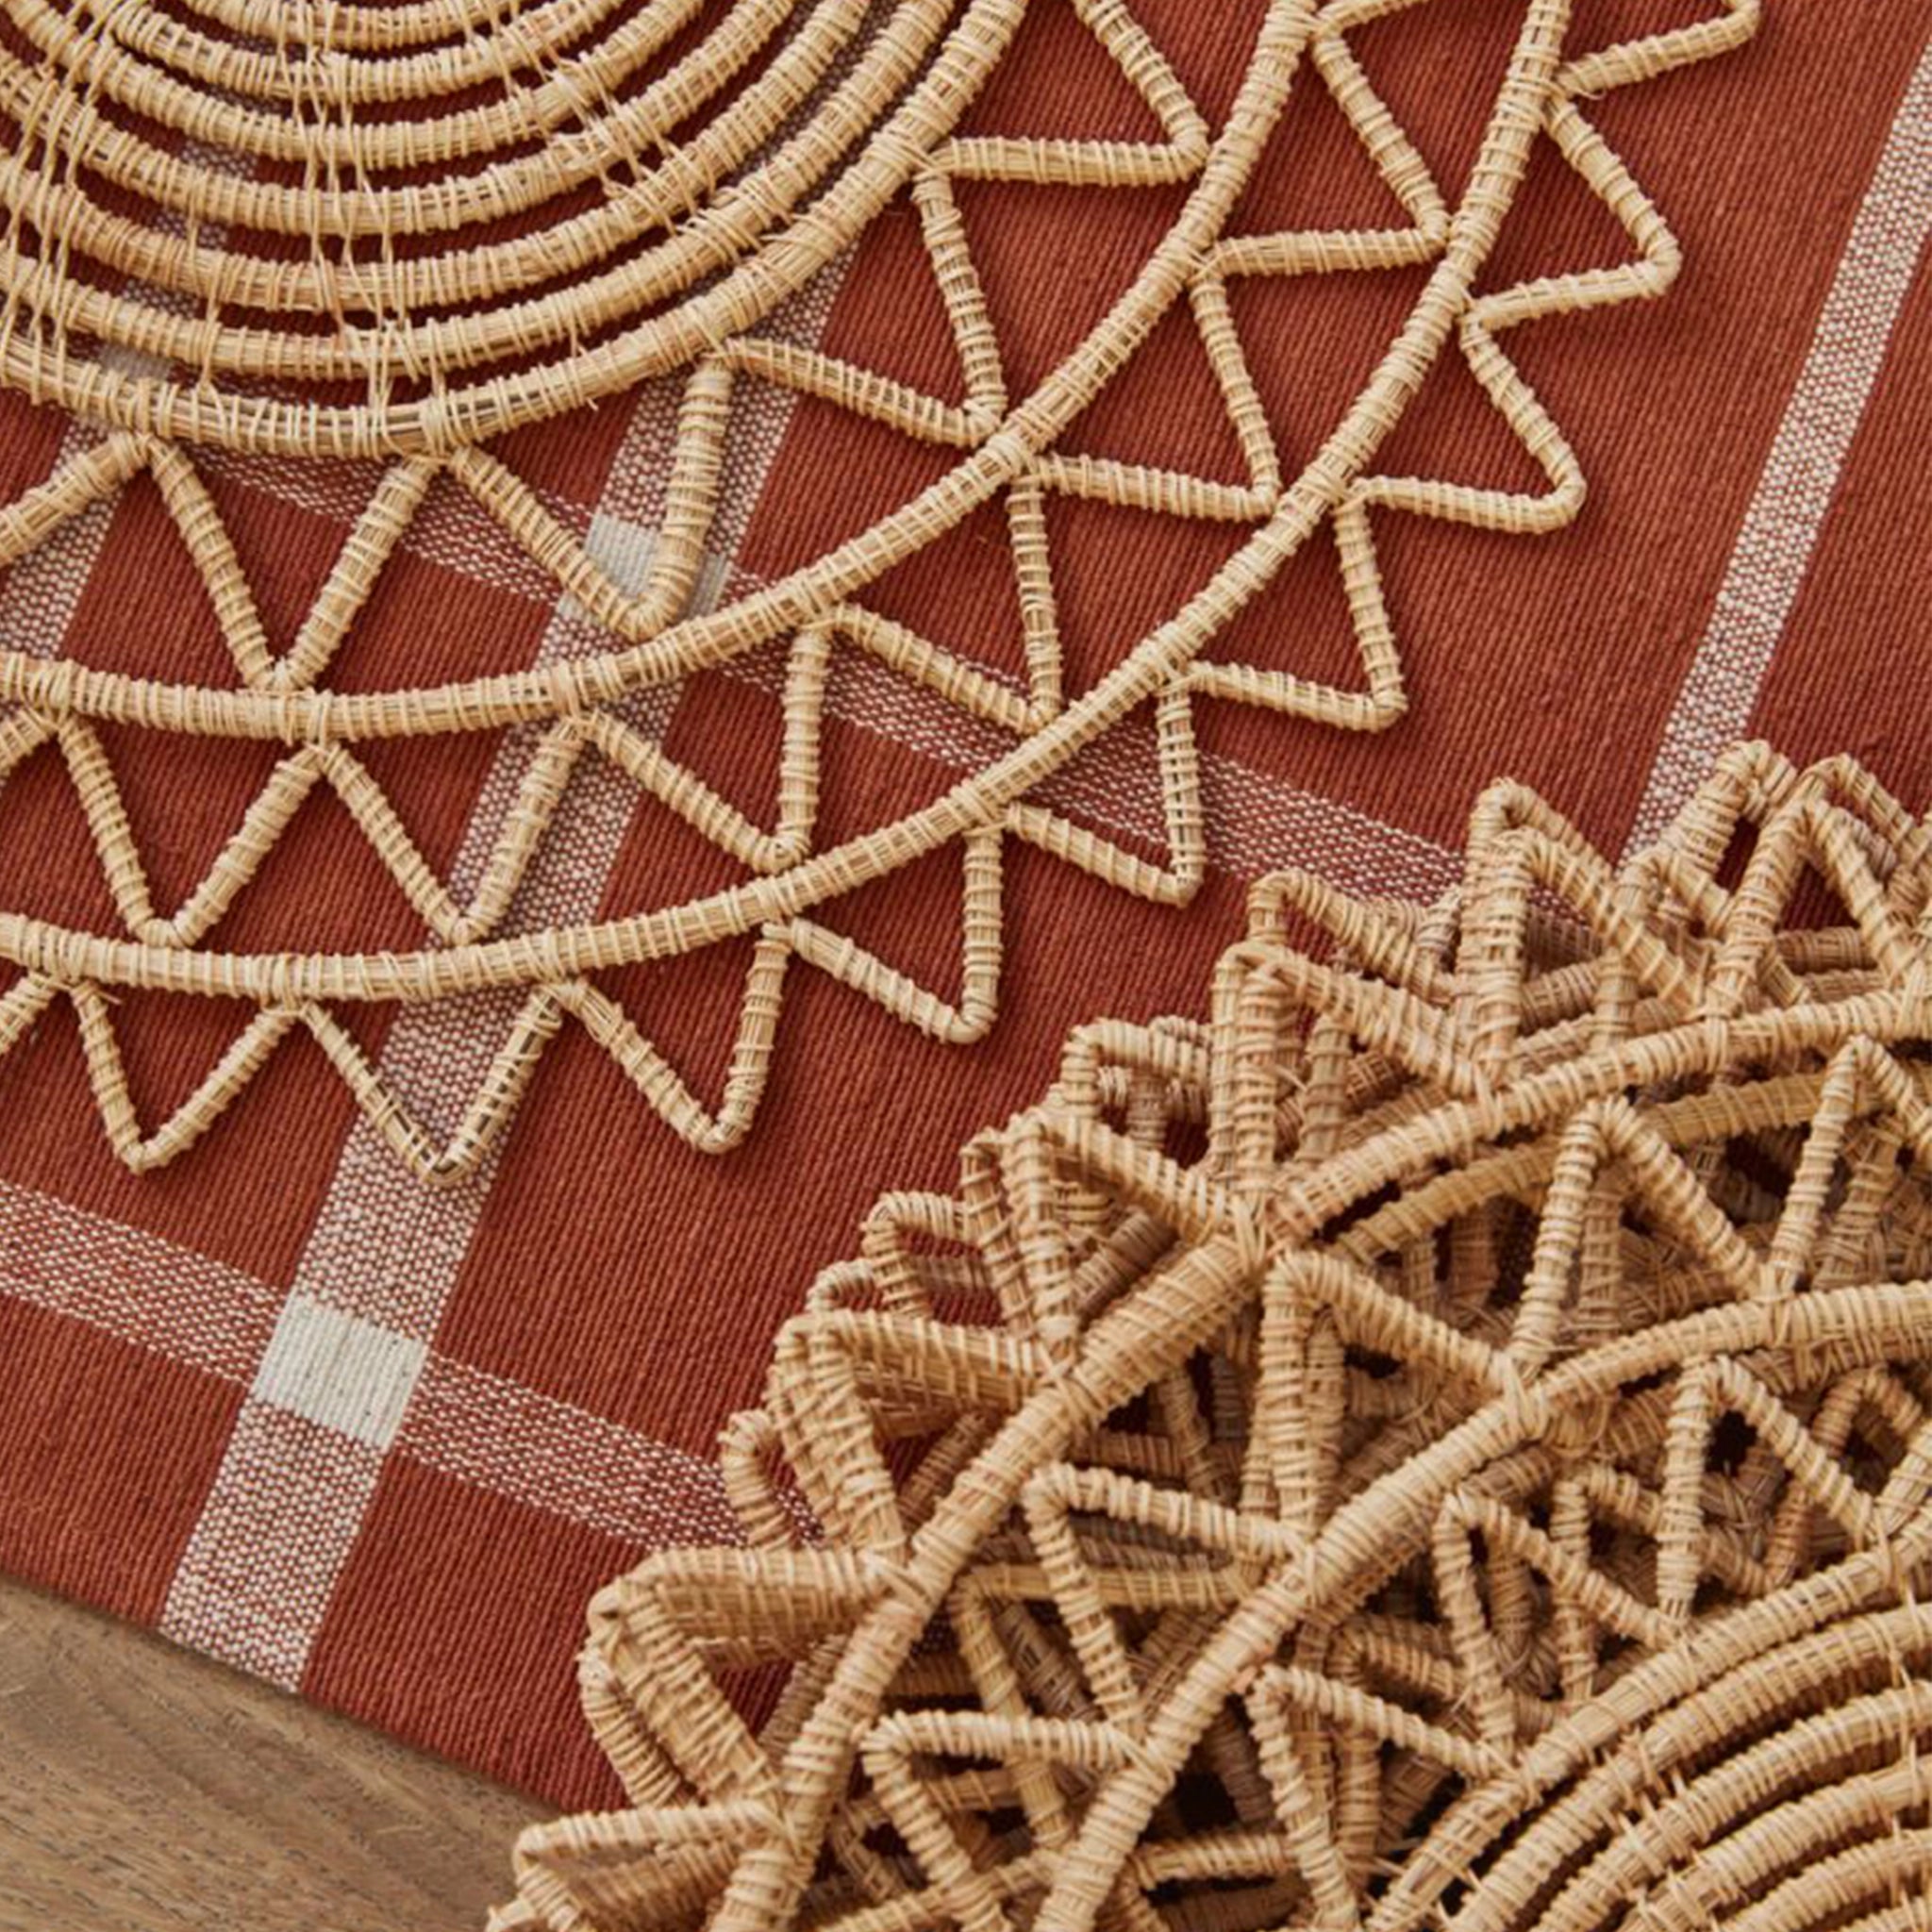 On a rust colored background is a wicker sun shaped placemat.